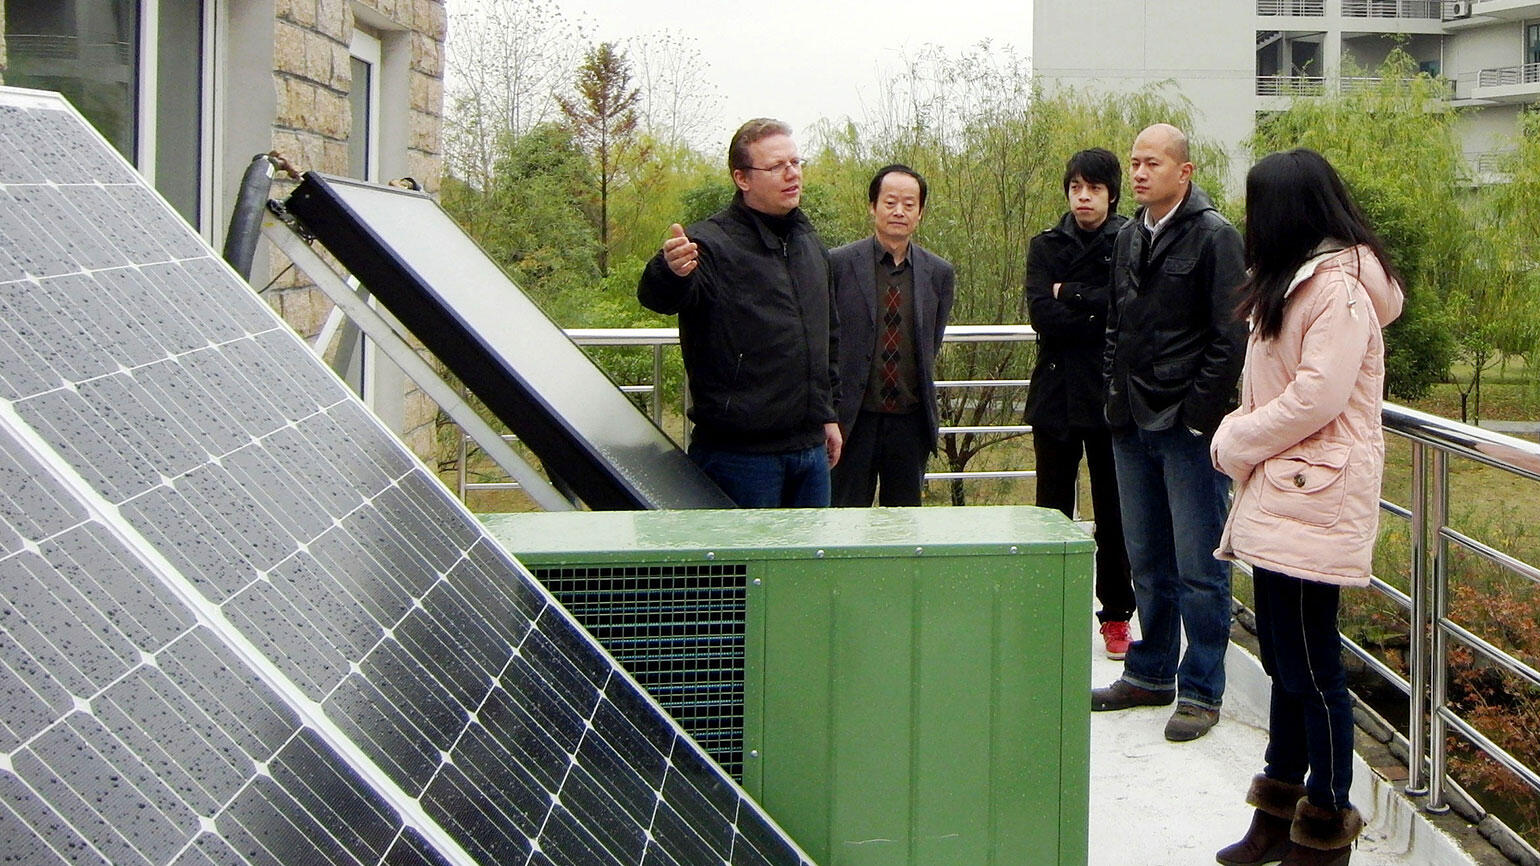 some people from China stand around solar cells and follow the explanations of a German